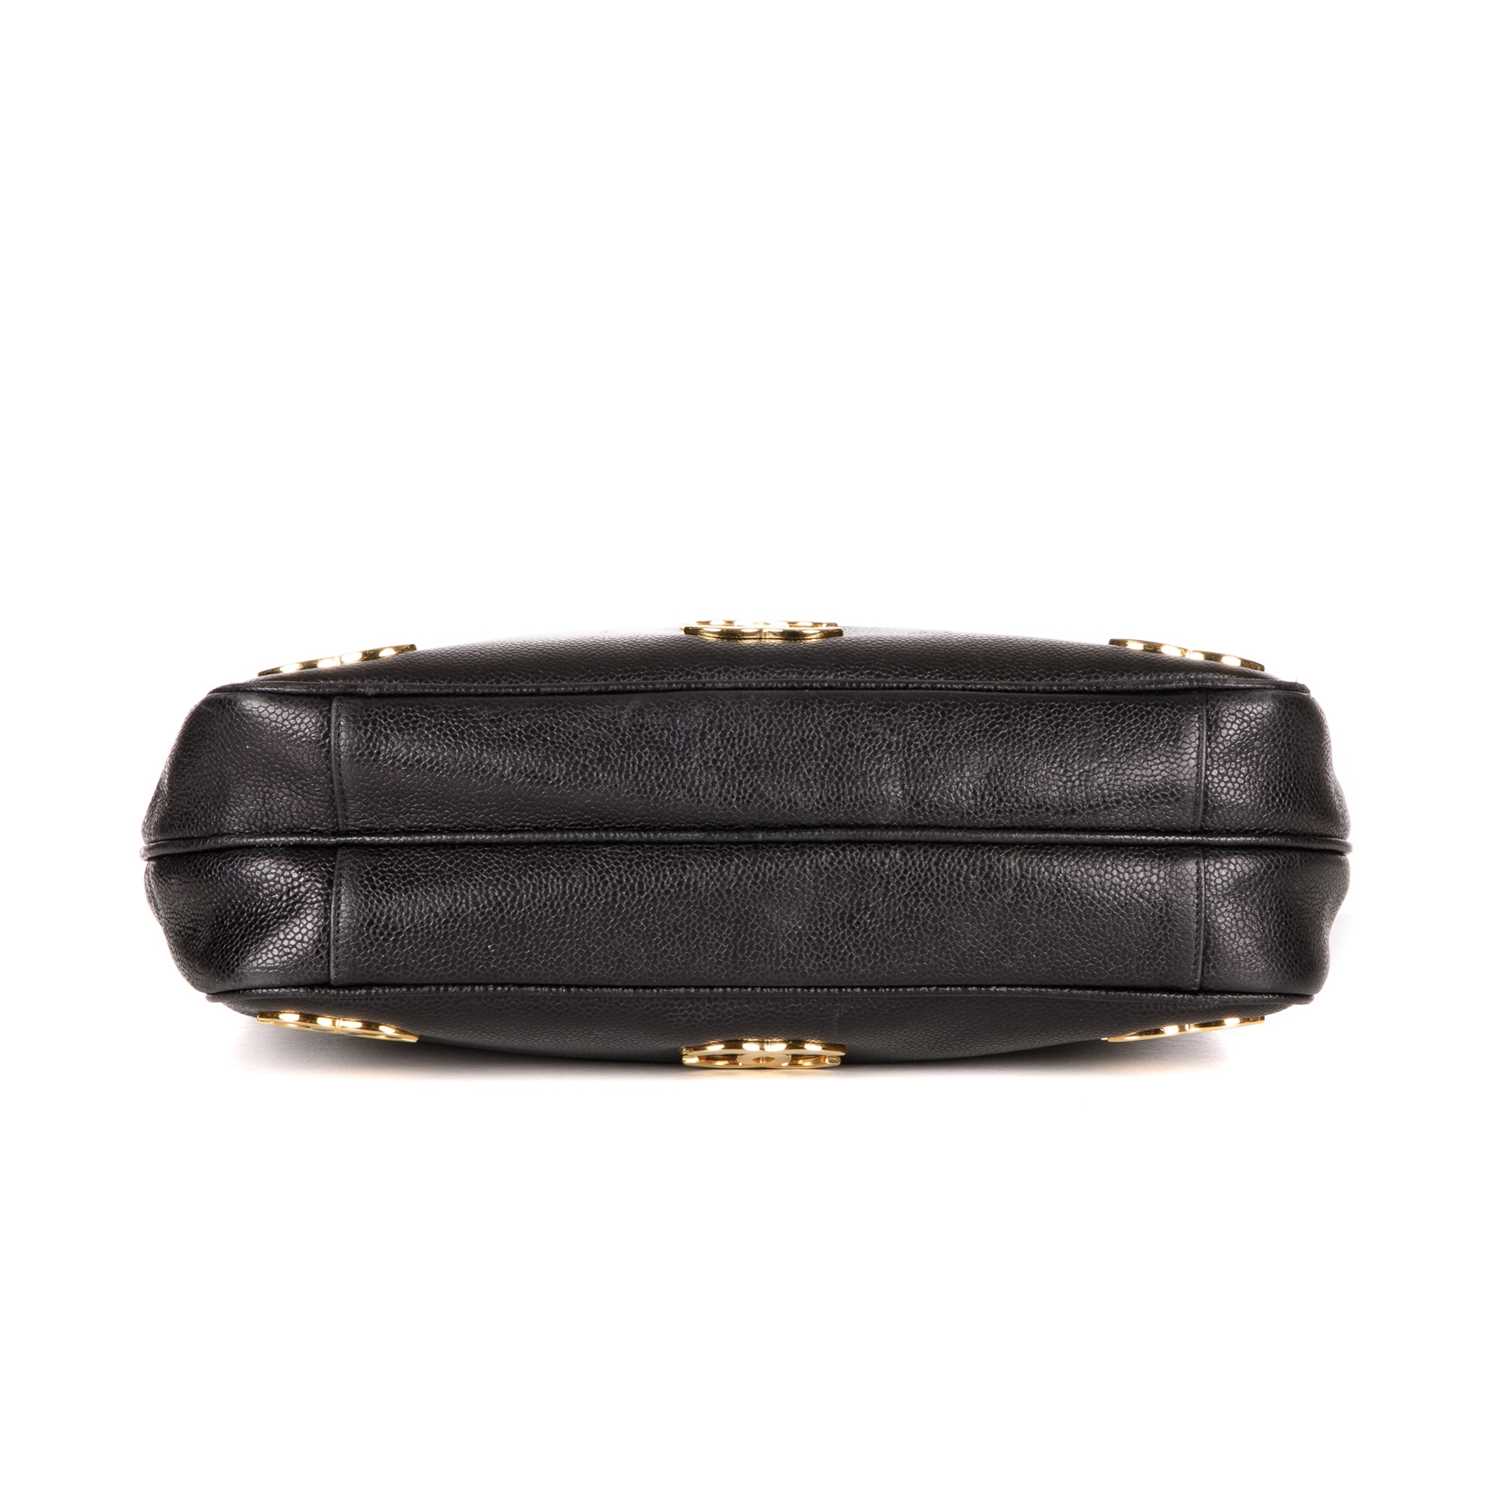 Chanel, a vintage caviar leather handbag, crafted from black caviar leather with gold-tone hardware, - Image 5 of 5